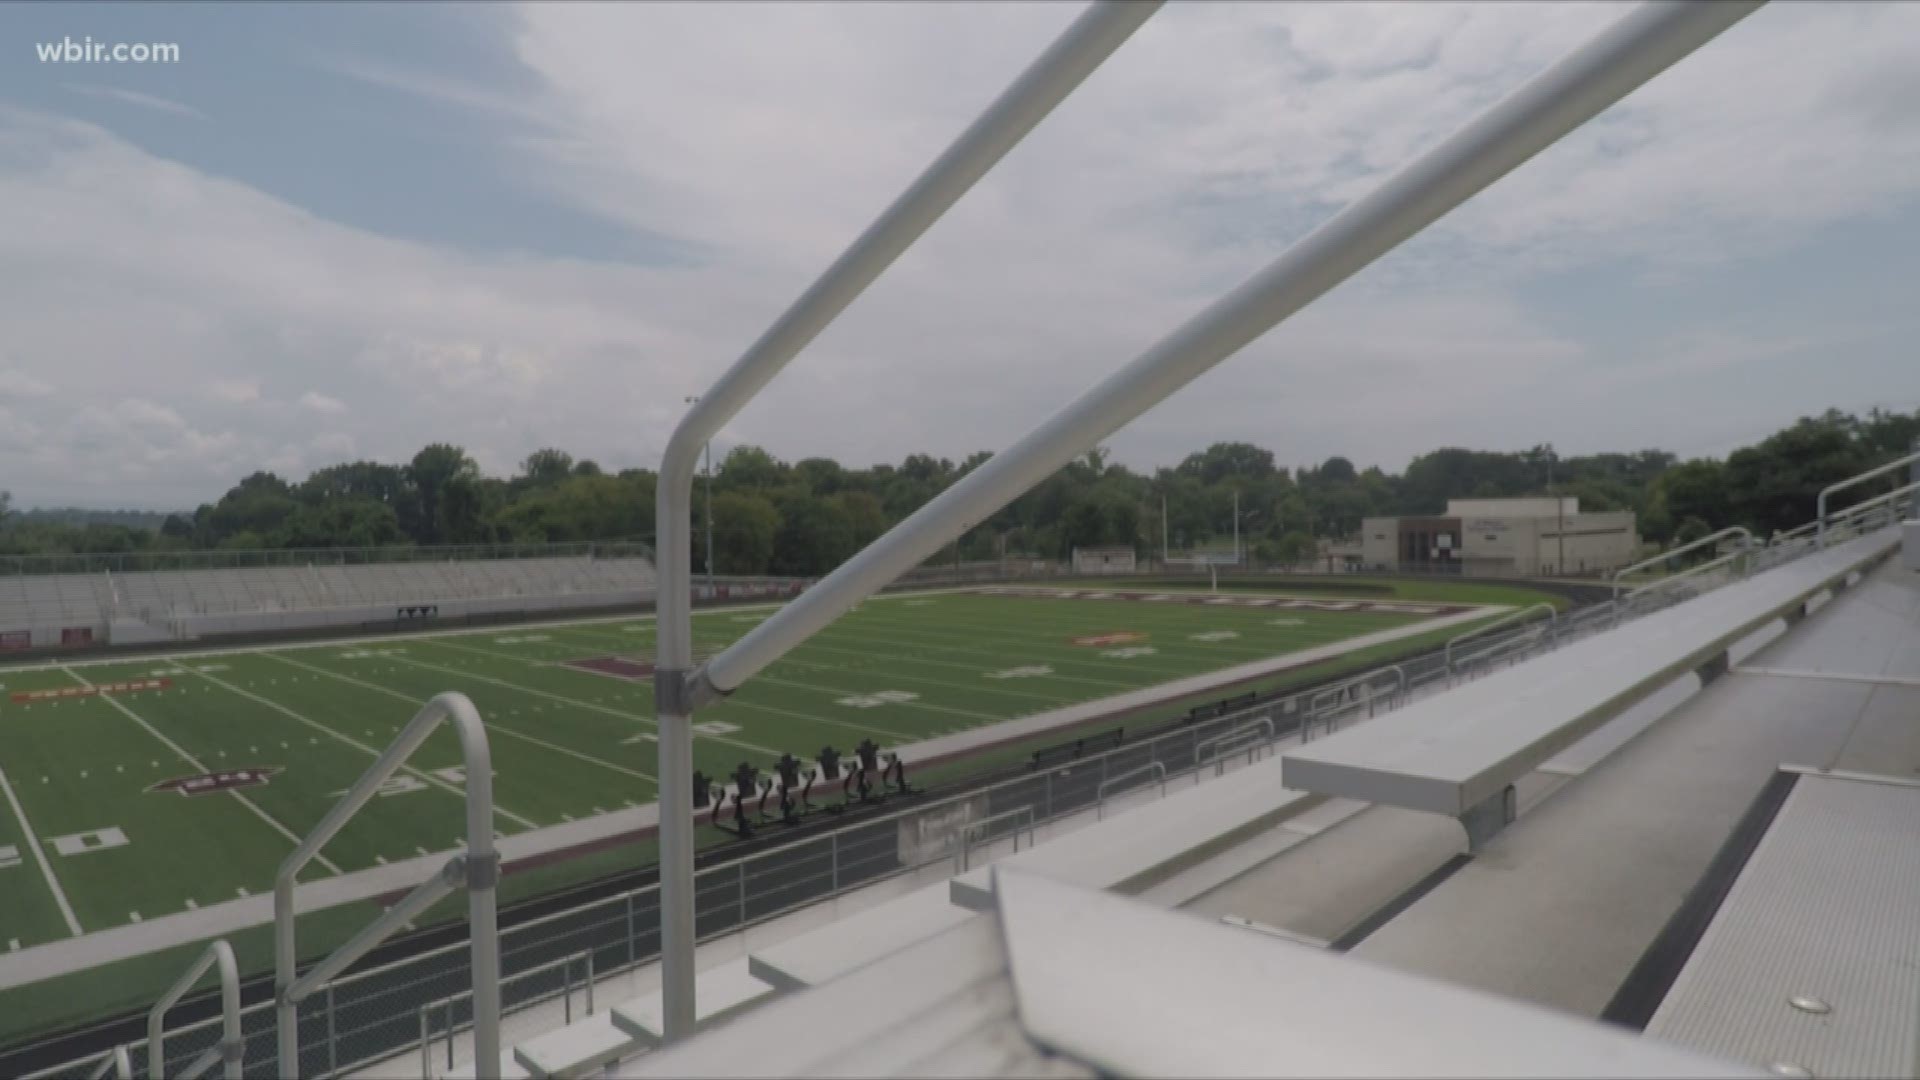 The fact that most schools have upgraded to turf means weather tends to be less of a problem.